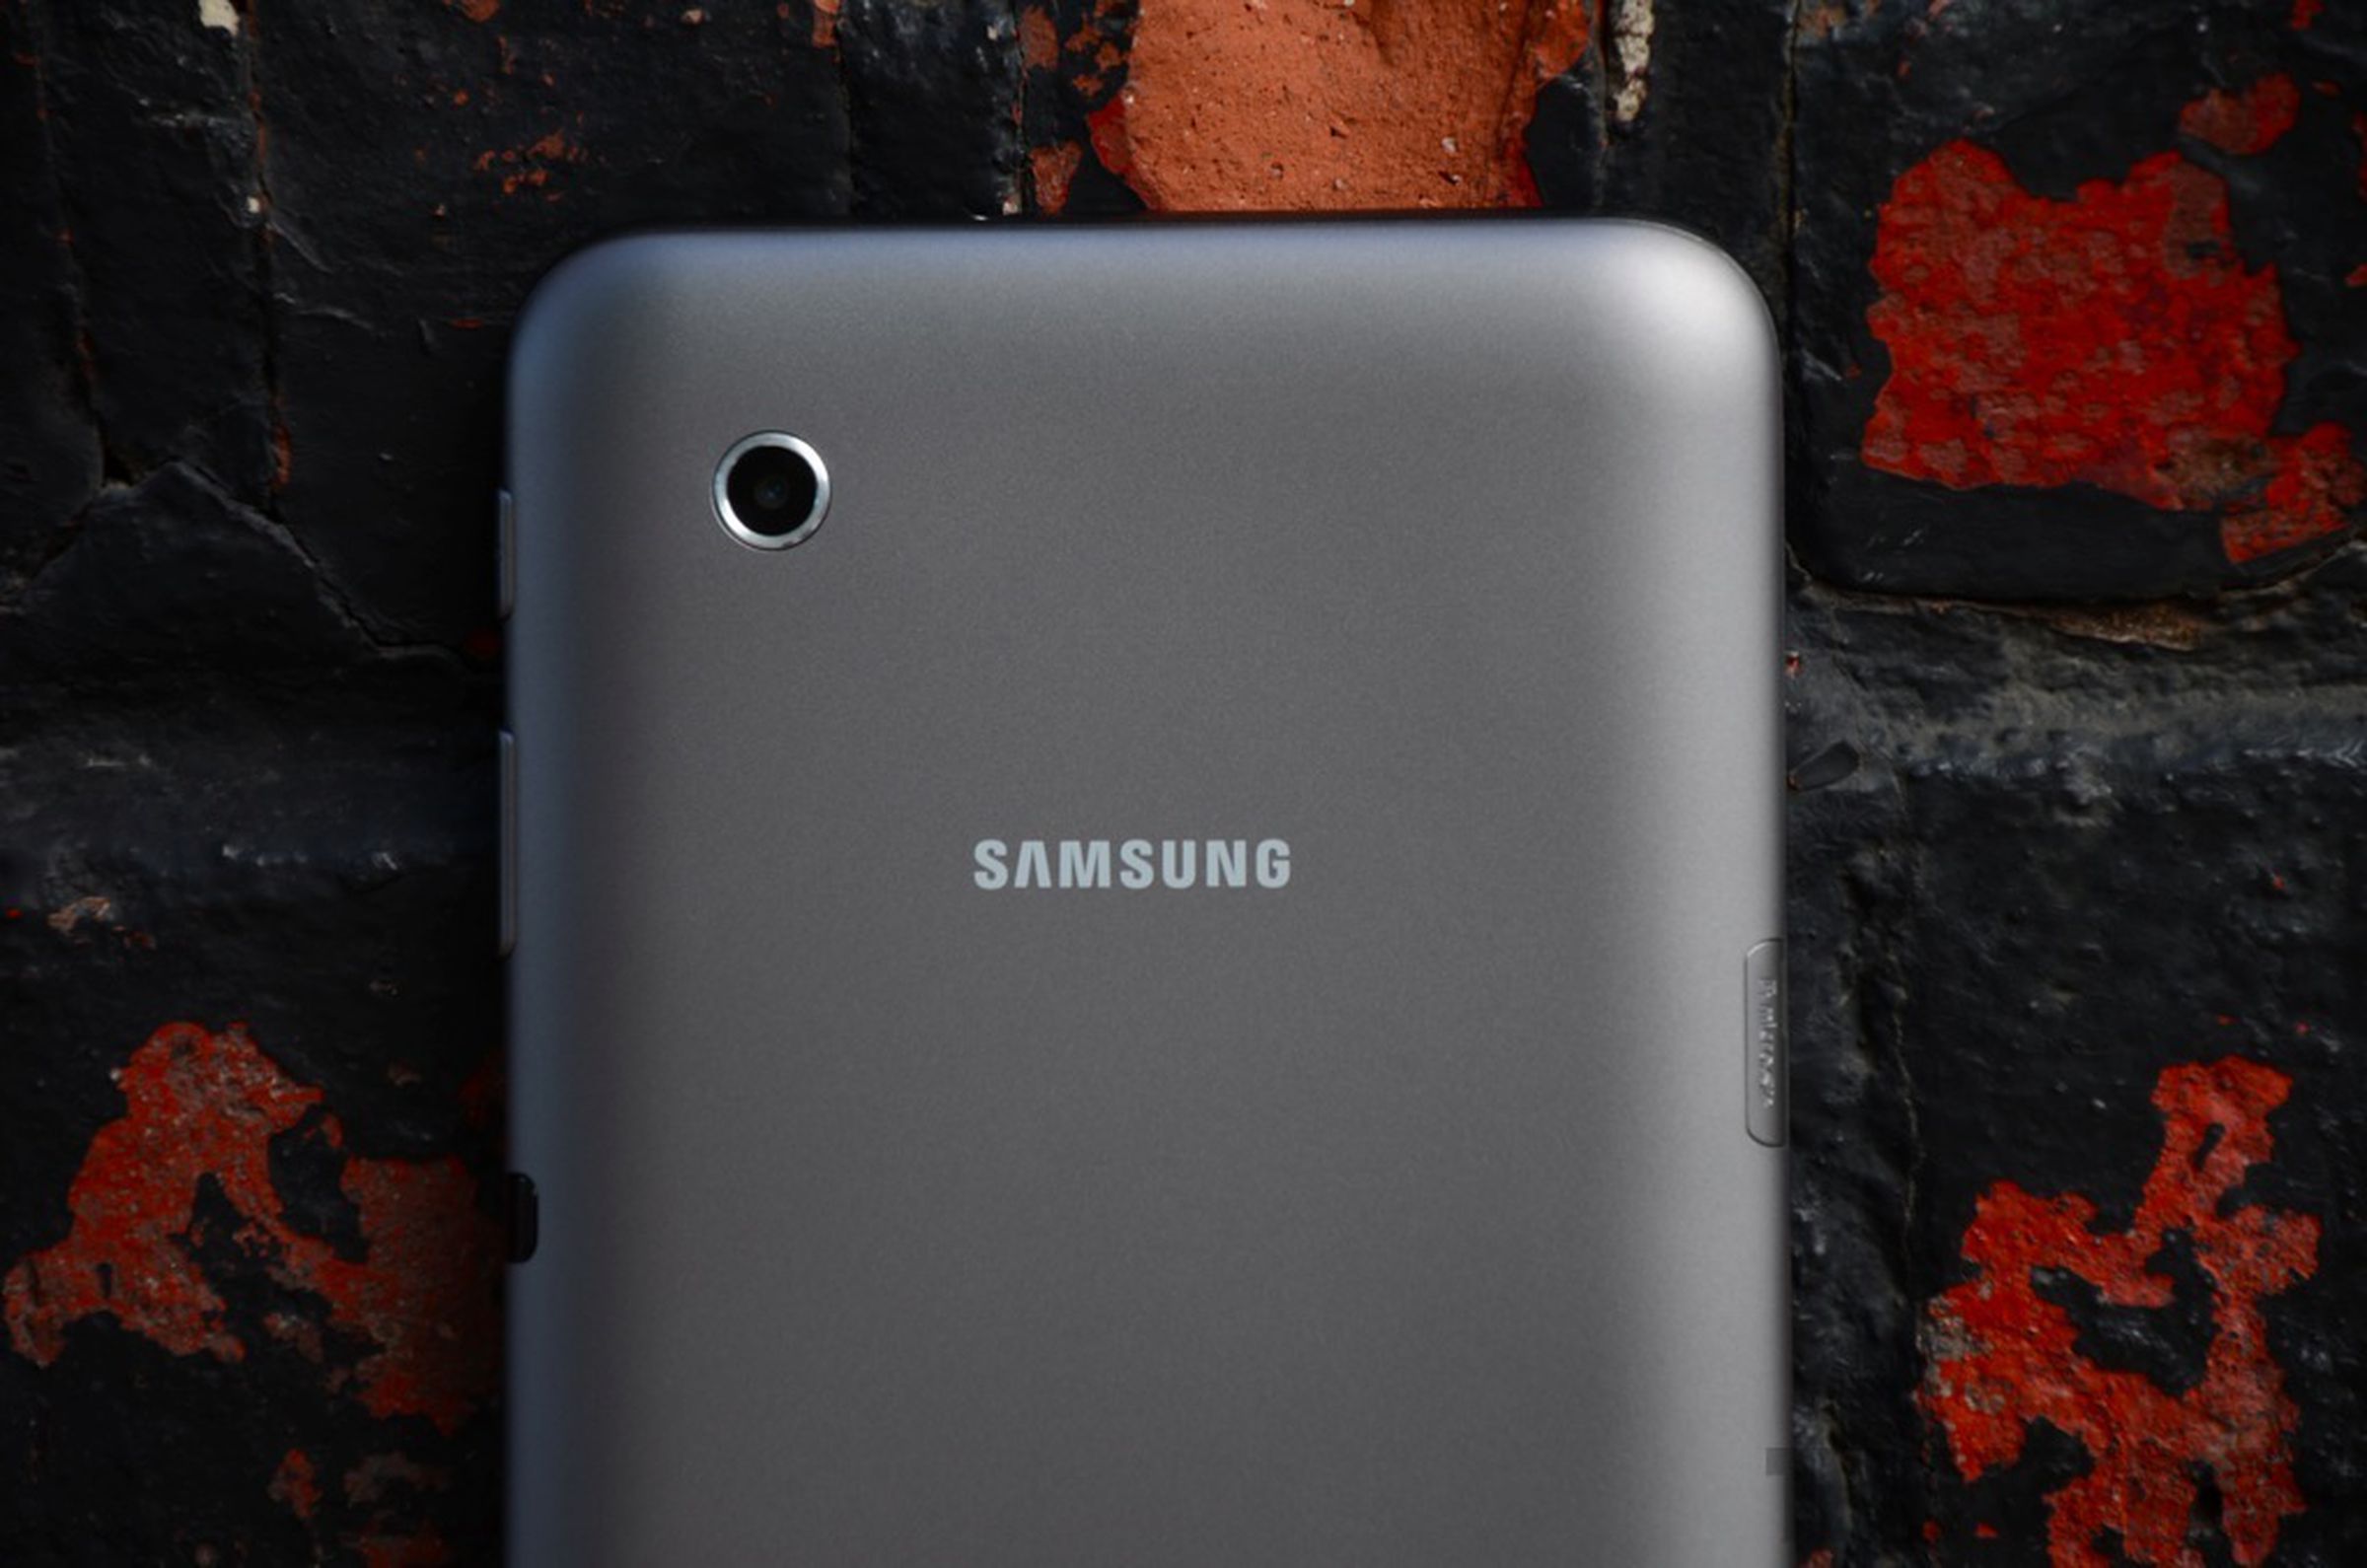 Samsung Galaxy Tab 2 7.0 review pictures